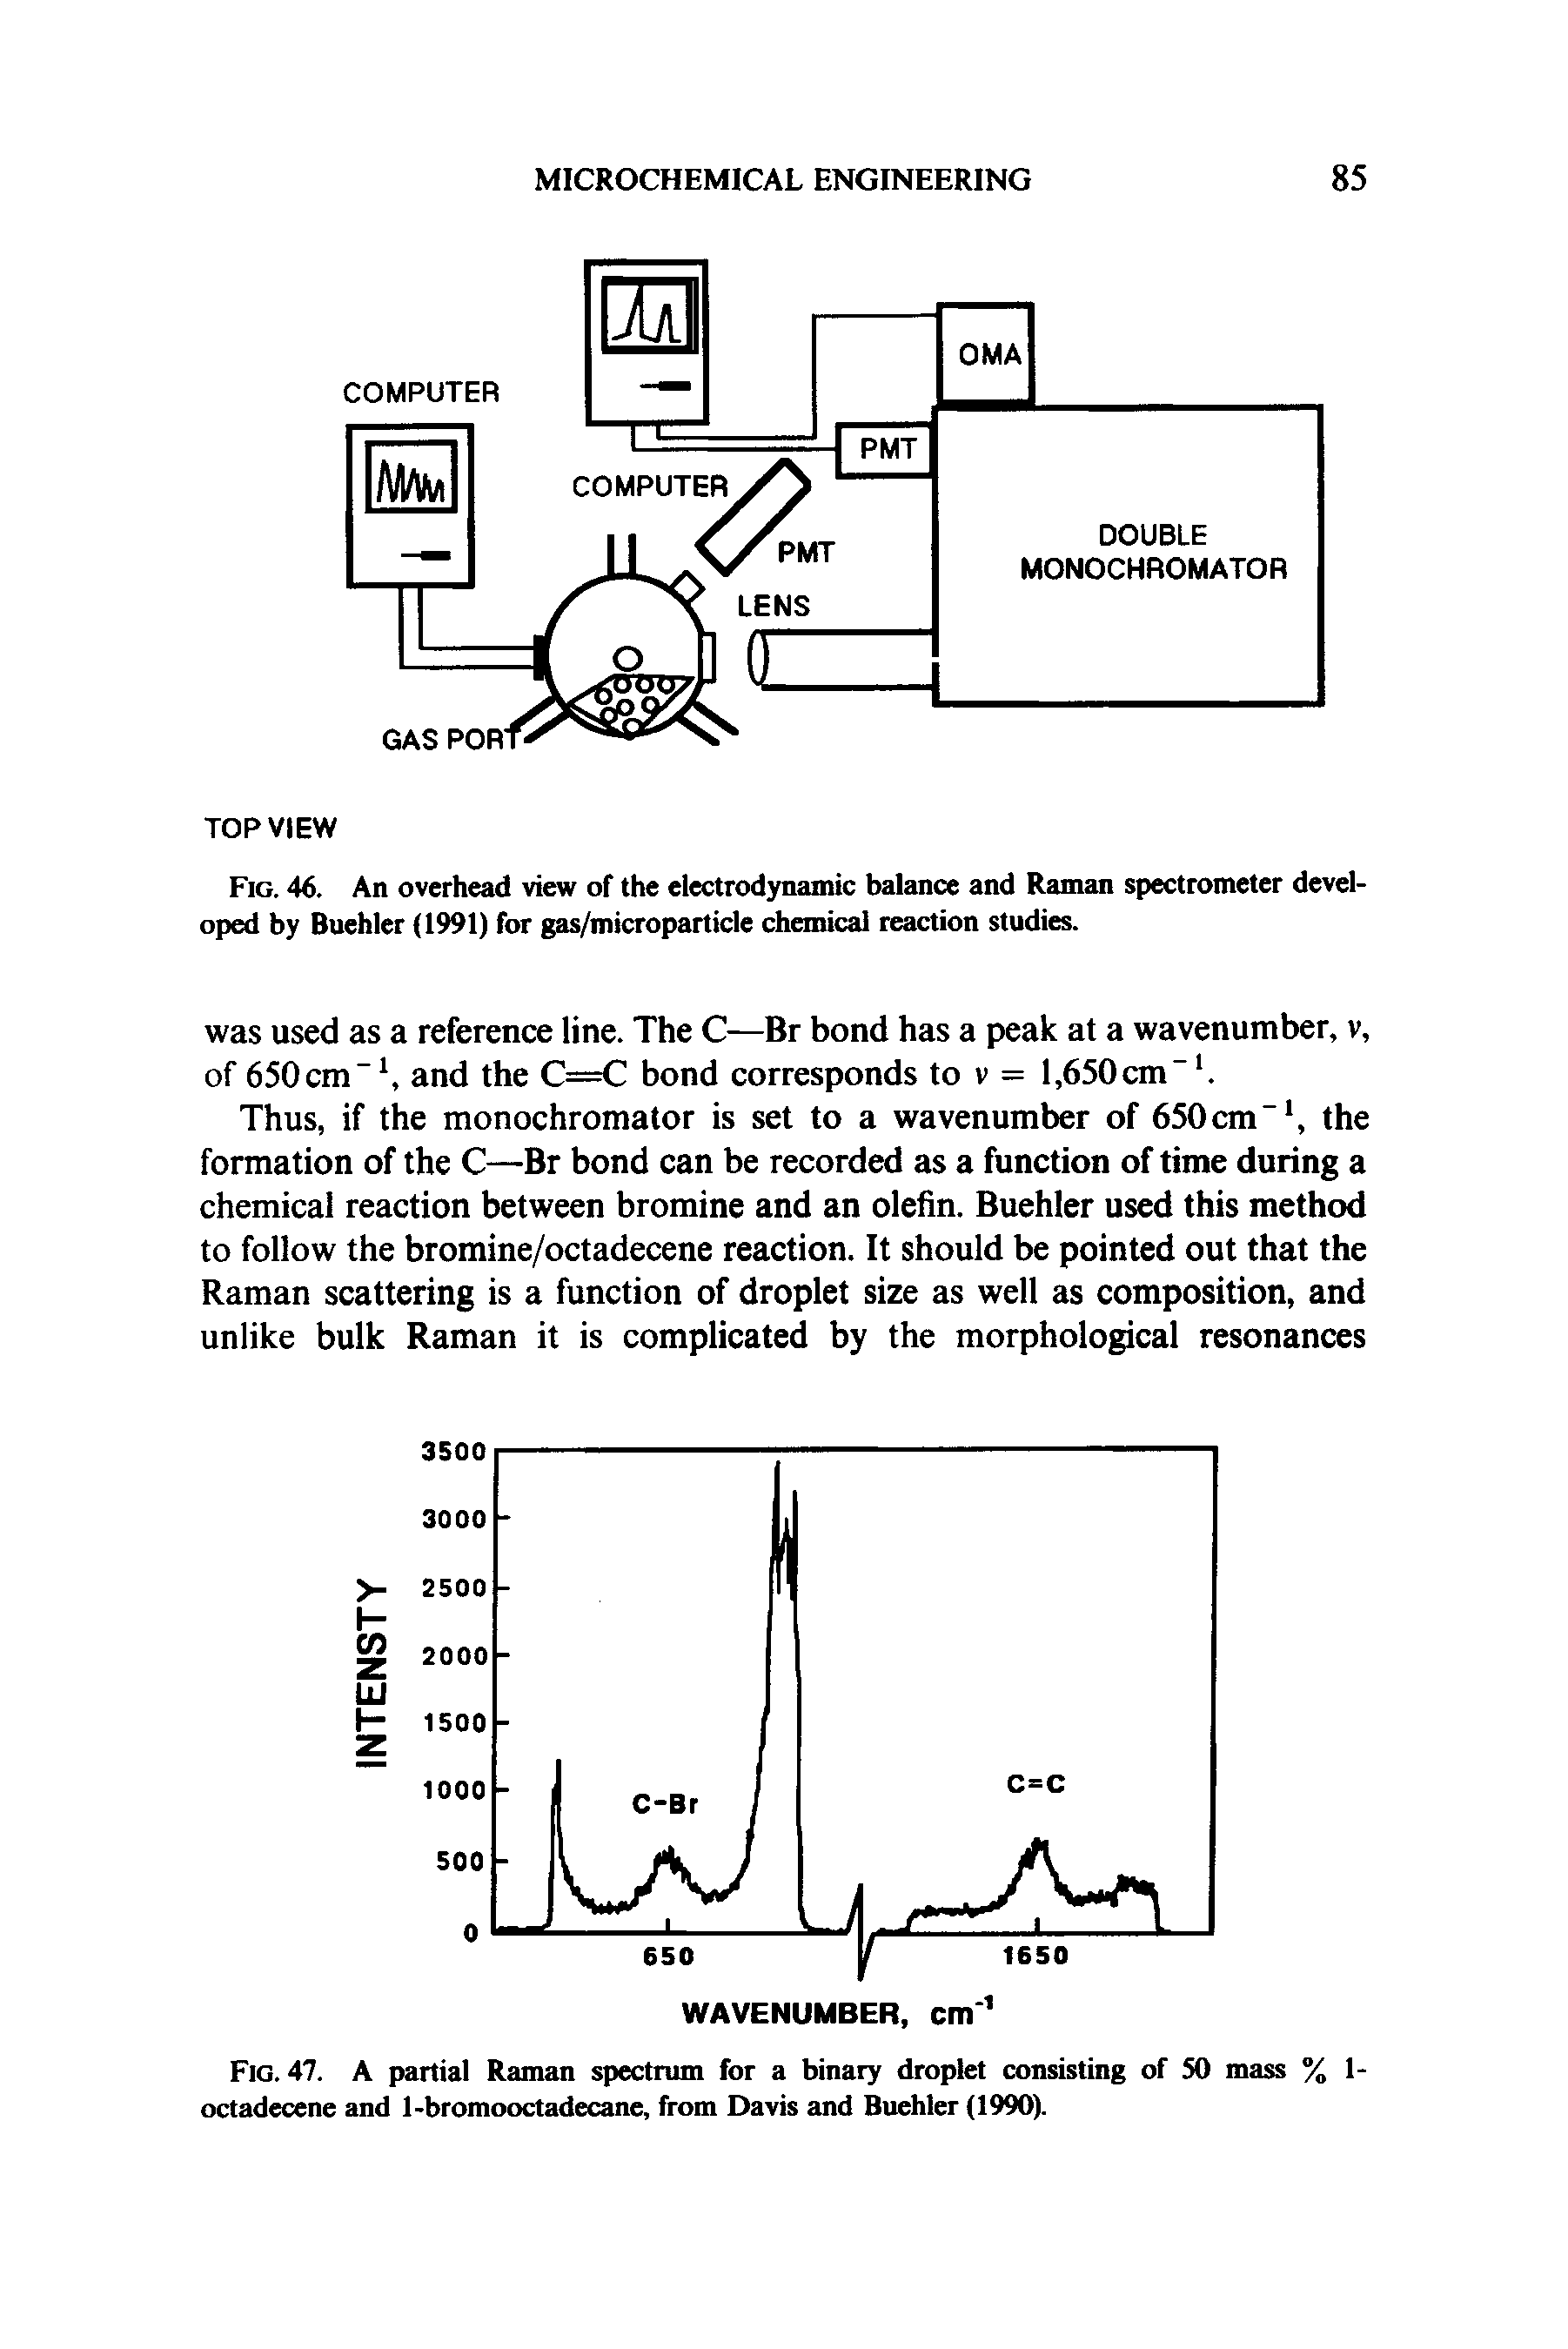 Fig. 46. An overhead view of the electrodynamic balance and Raman spectrometer developed by Buehler (1991) for gas/microparticle chemical reaction studies.